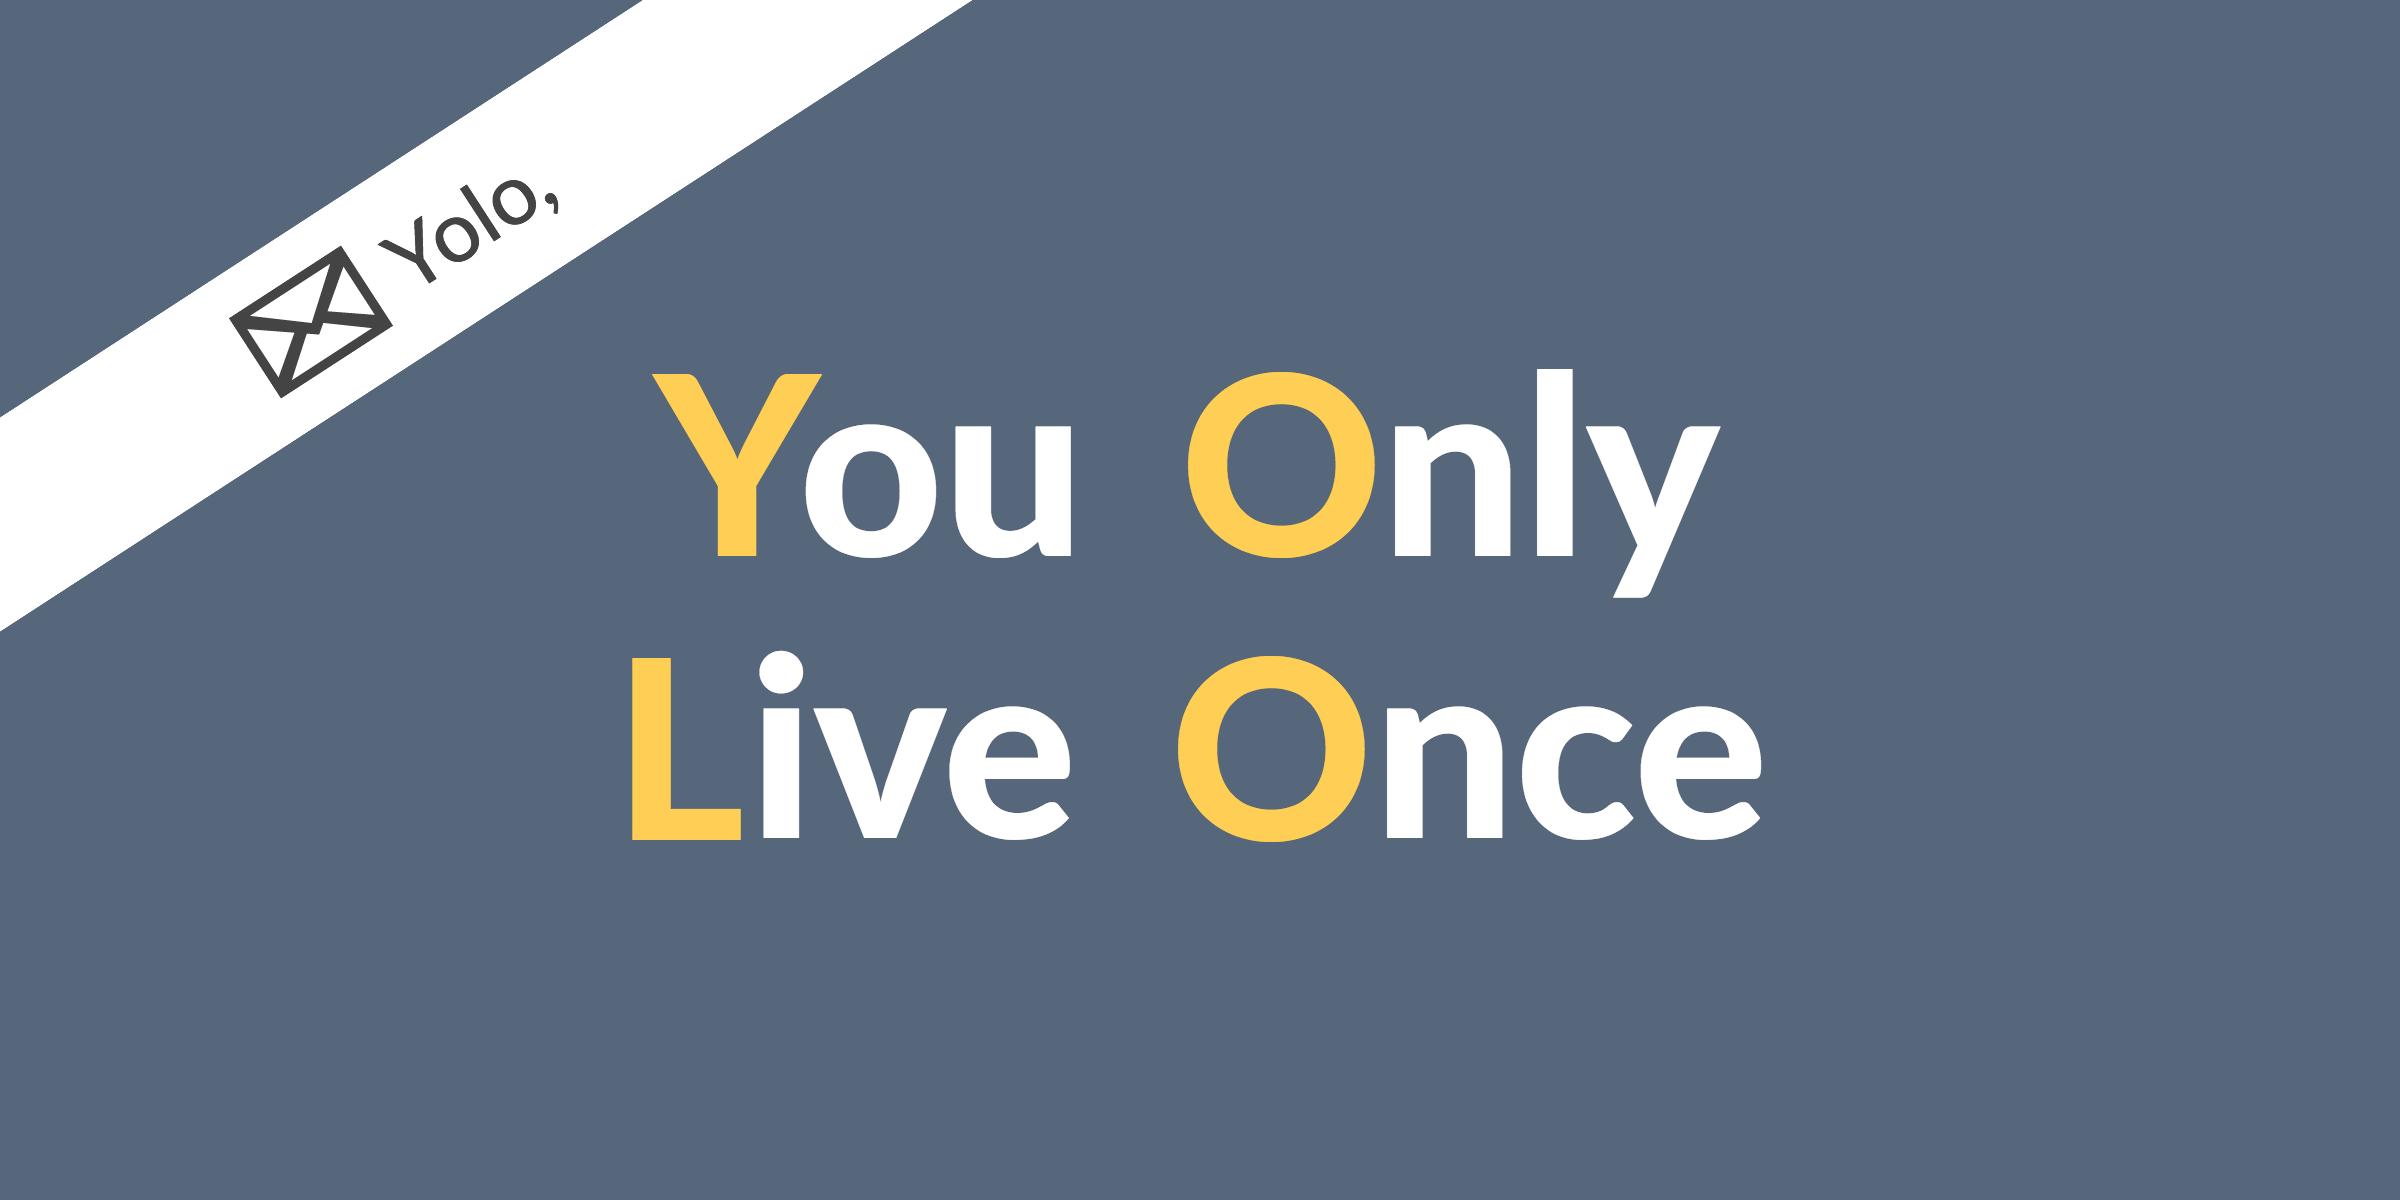 YOLO - you only live once